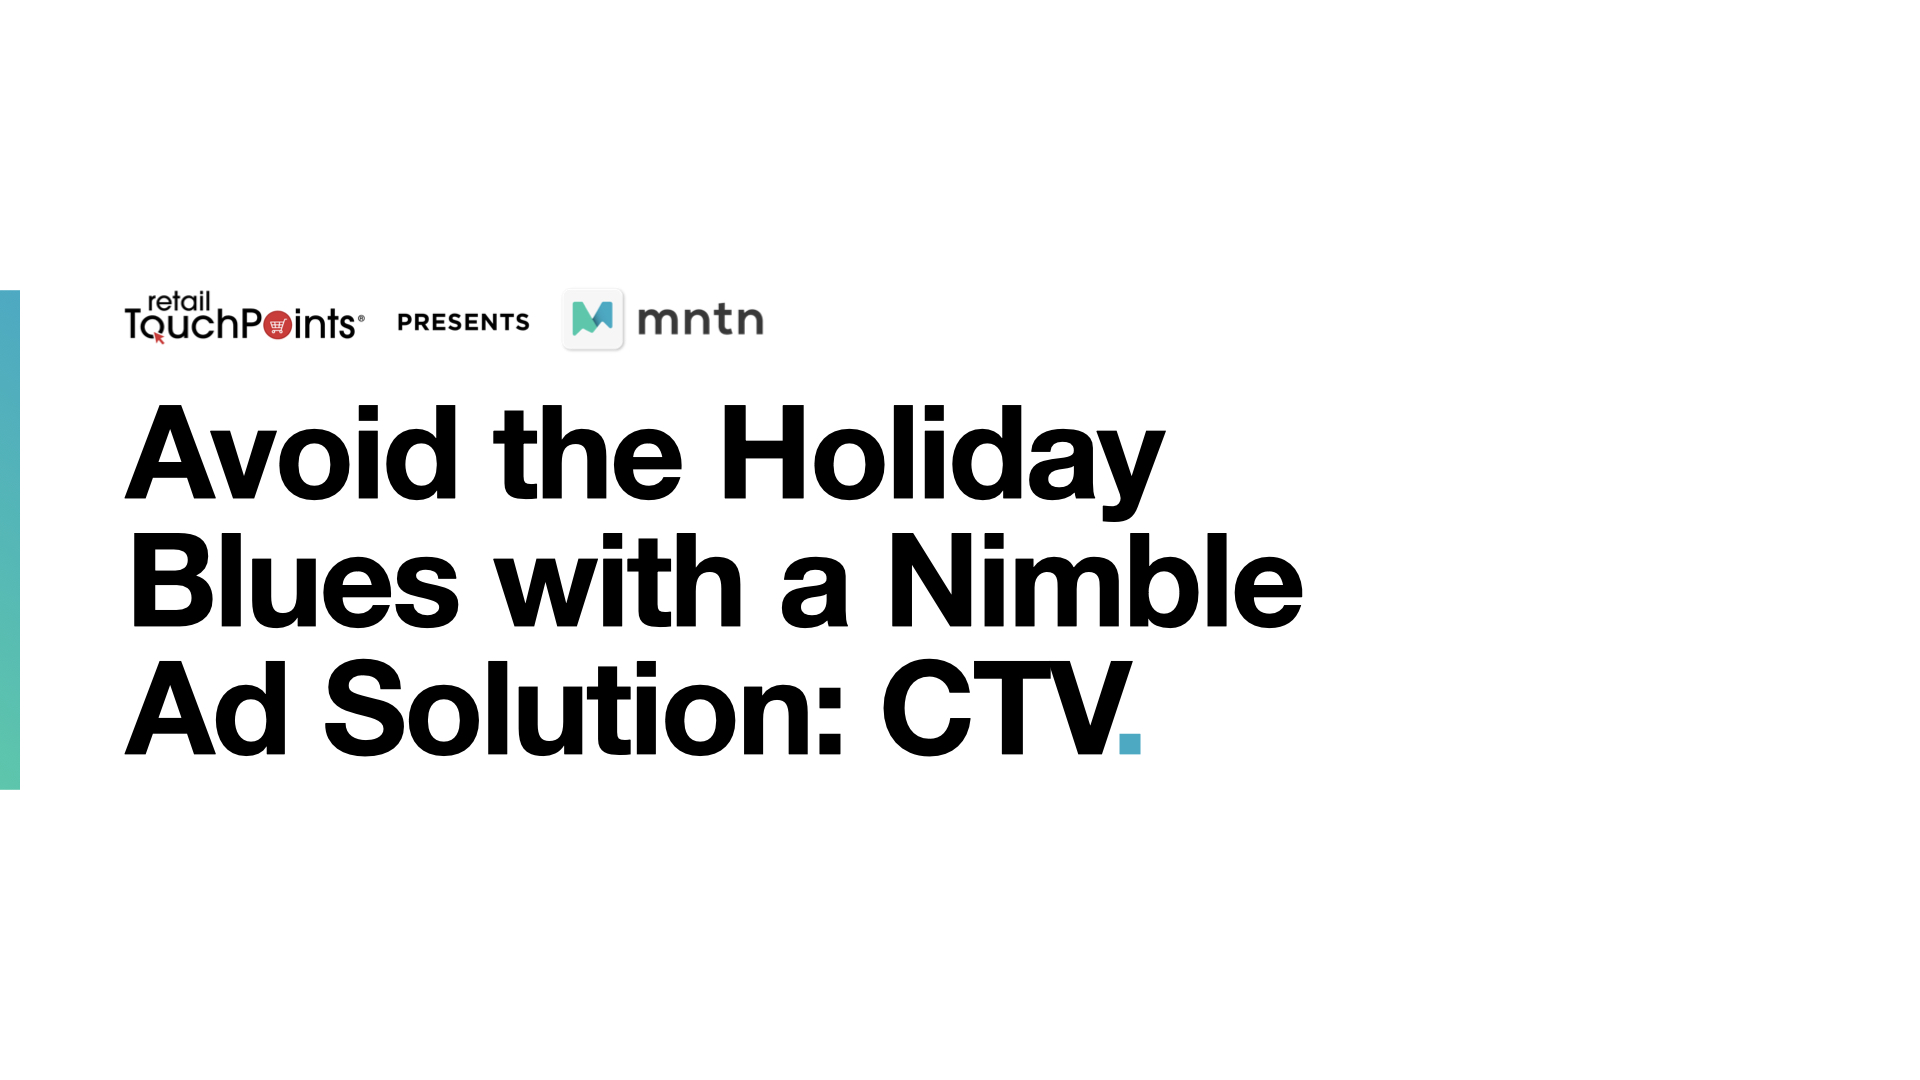 Avoid the Holiday Blues with a Nimble Ad Solution: CTV